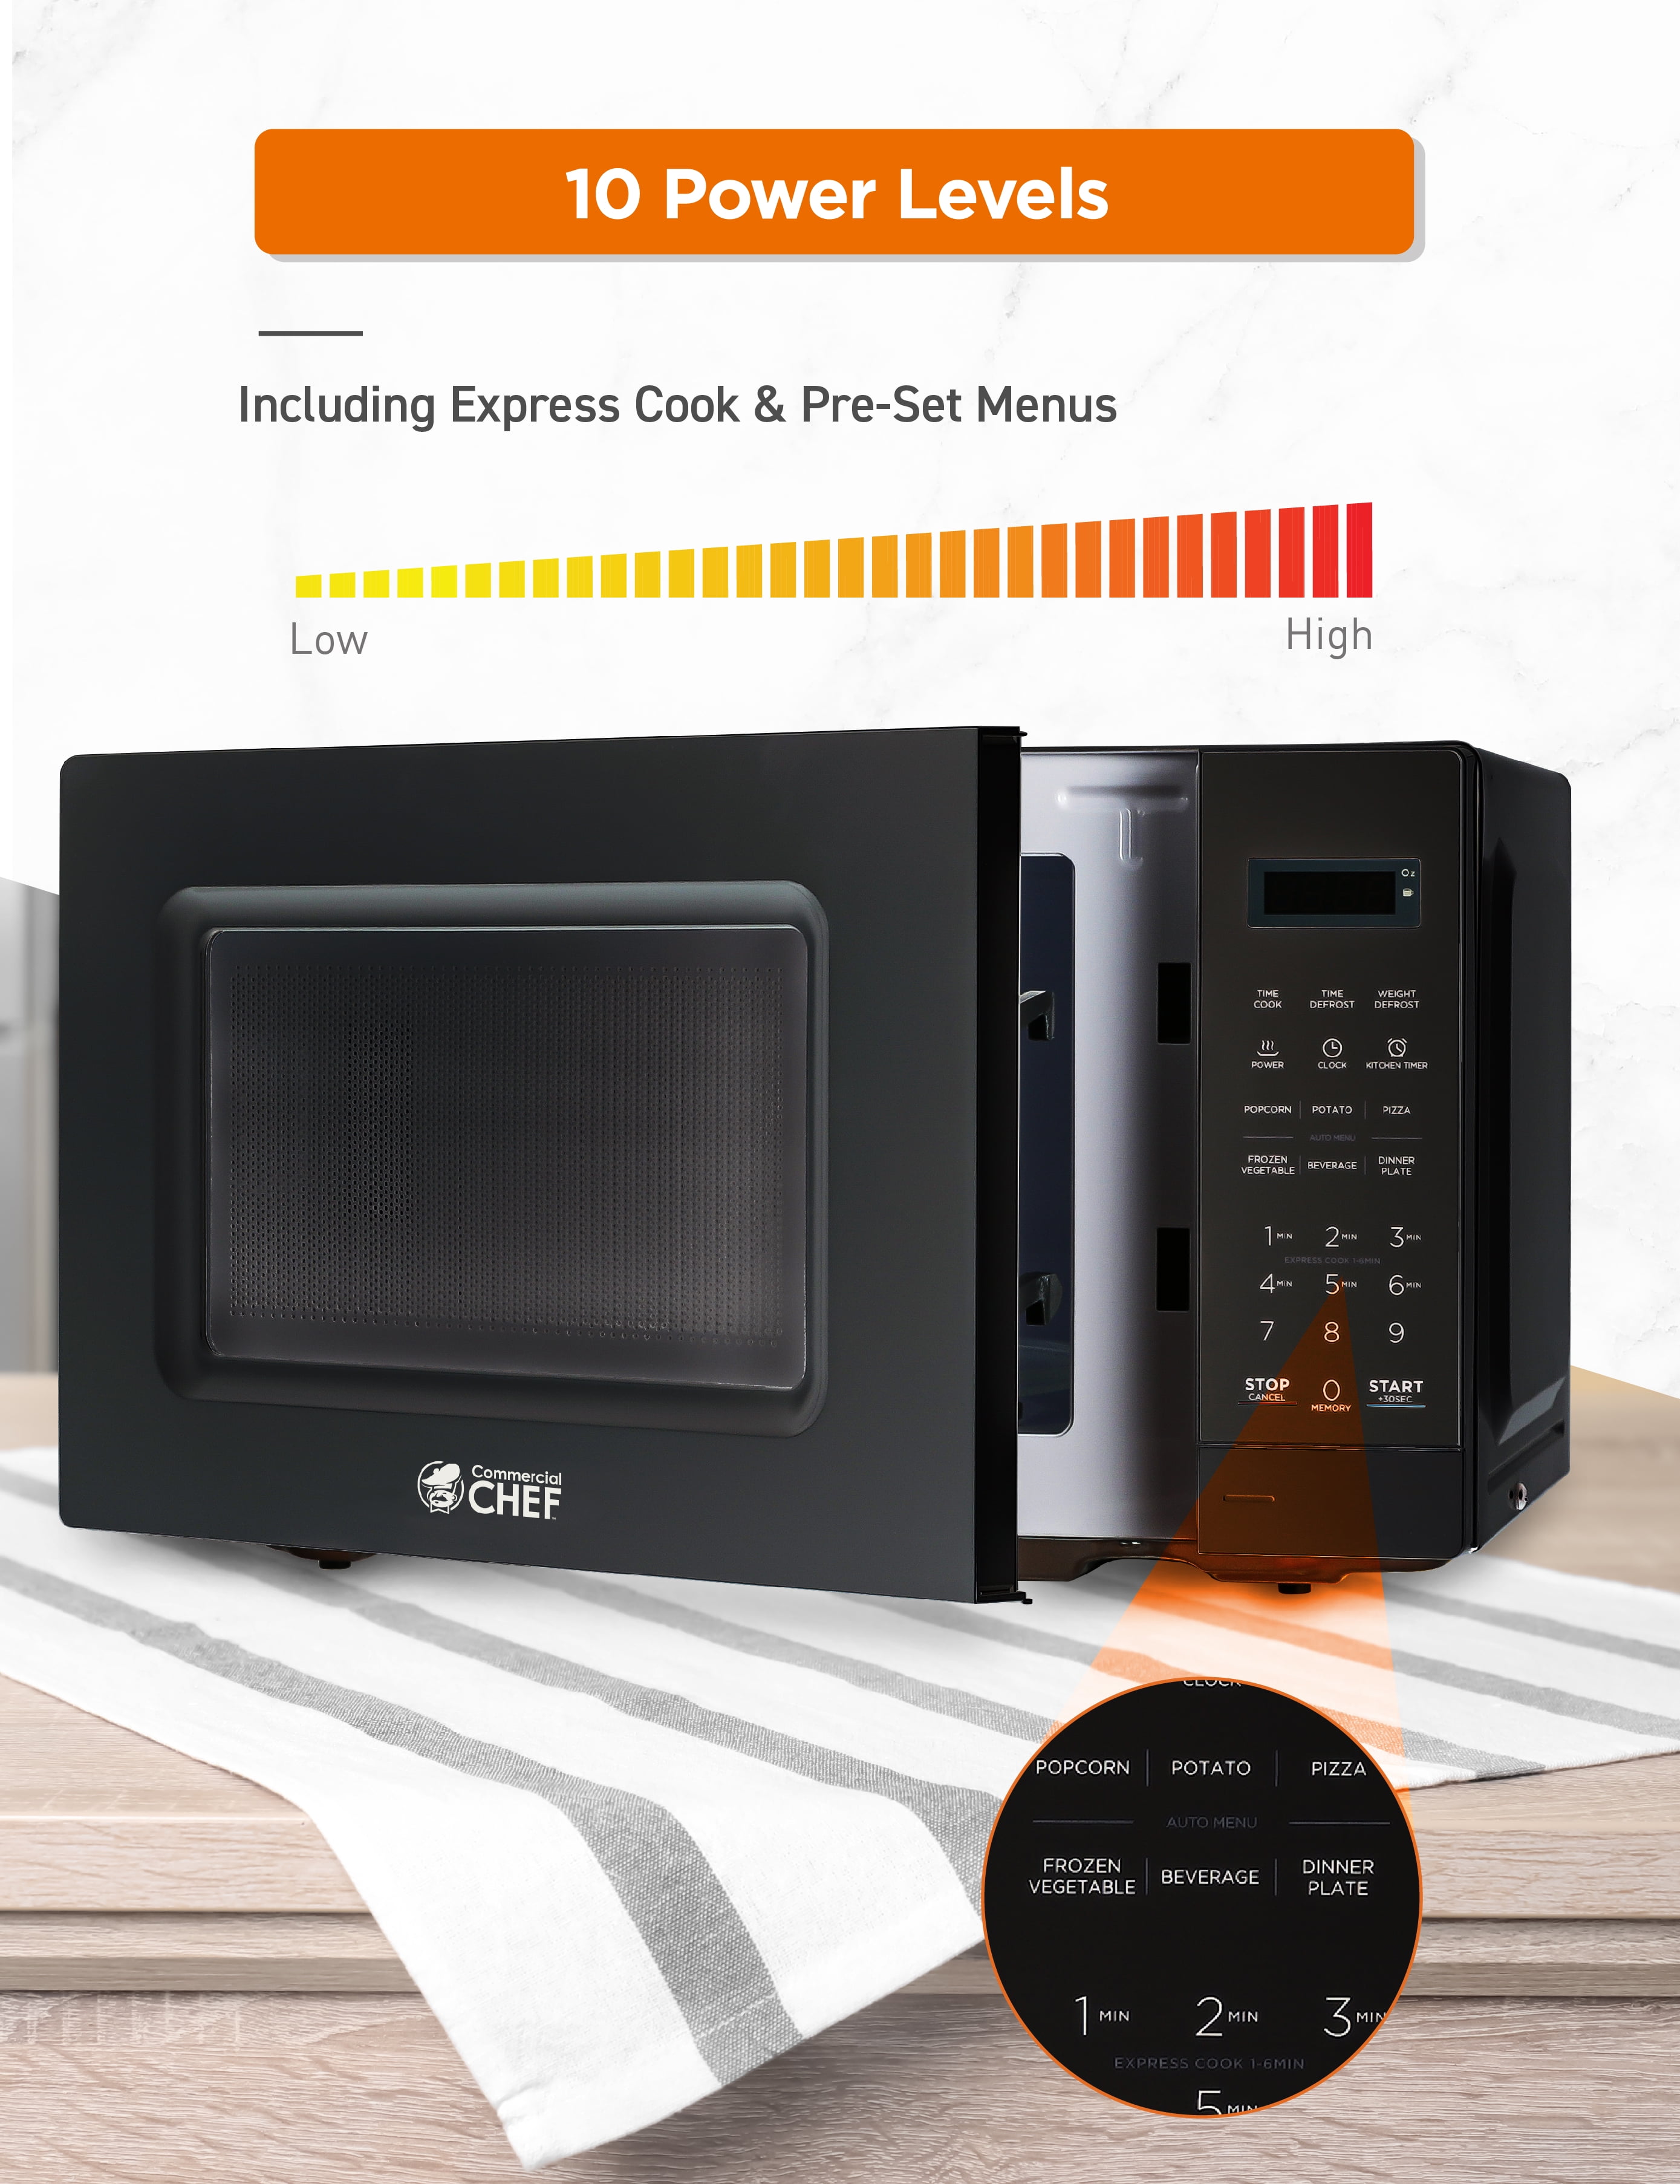 COMMERCIAL CHEF Countertop Microwave Oven 0.7 Cu. Ft. 700W, Black